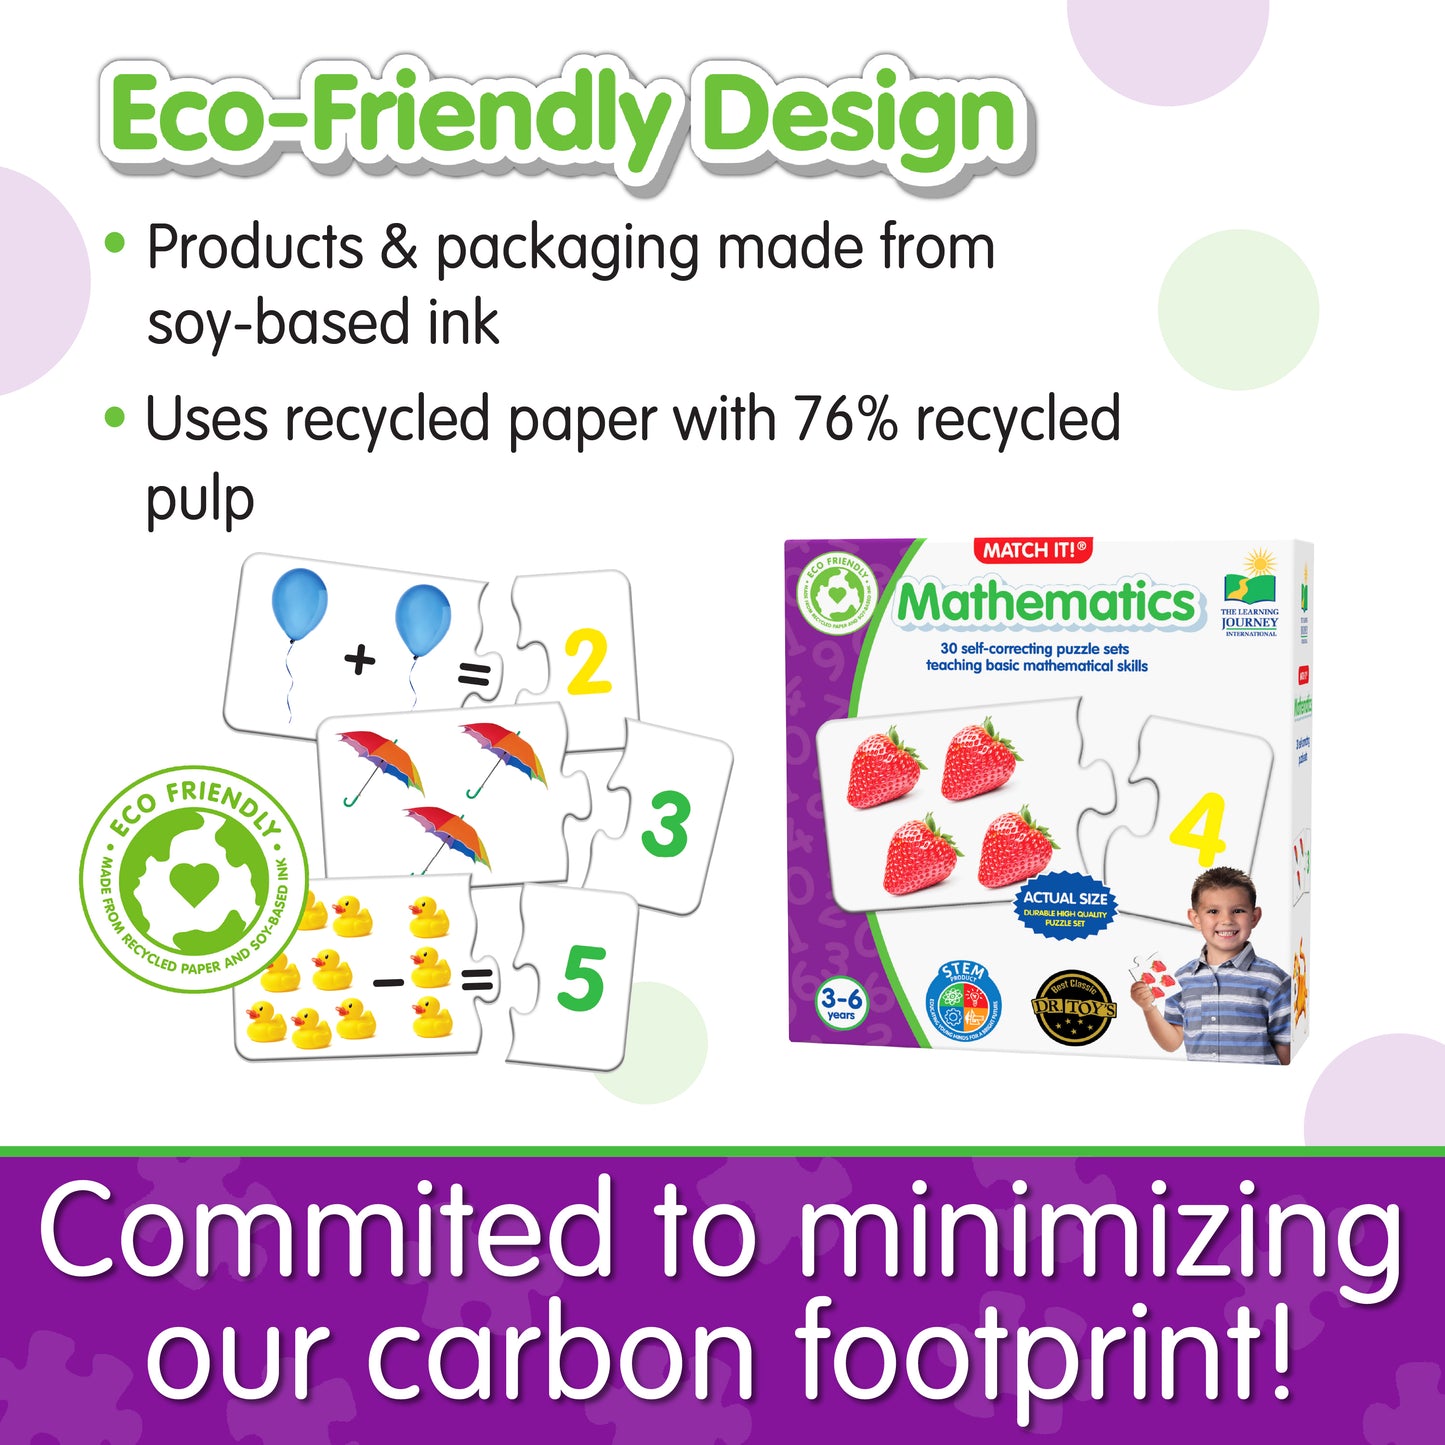 Infographic about Match It - Mathematics' eco-friendly design that says, "Committed to minimizing our carbon footprint!"